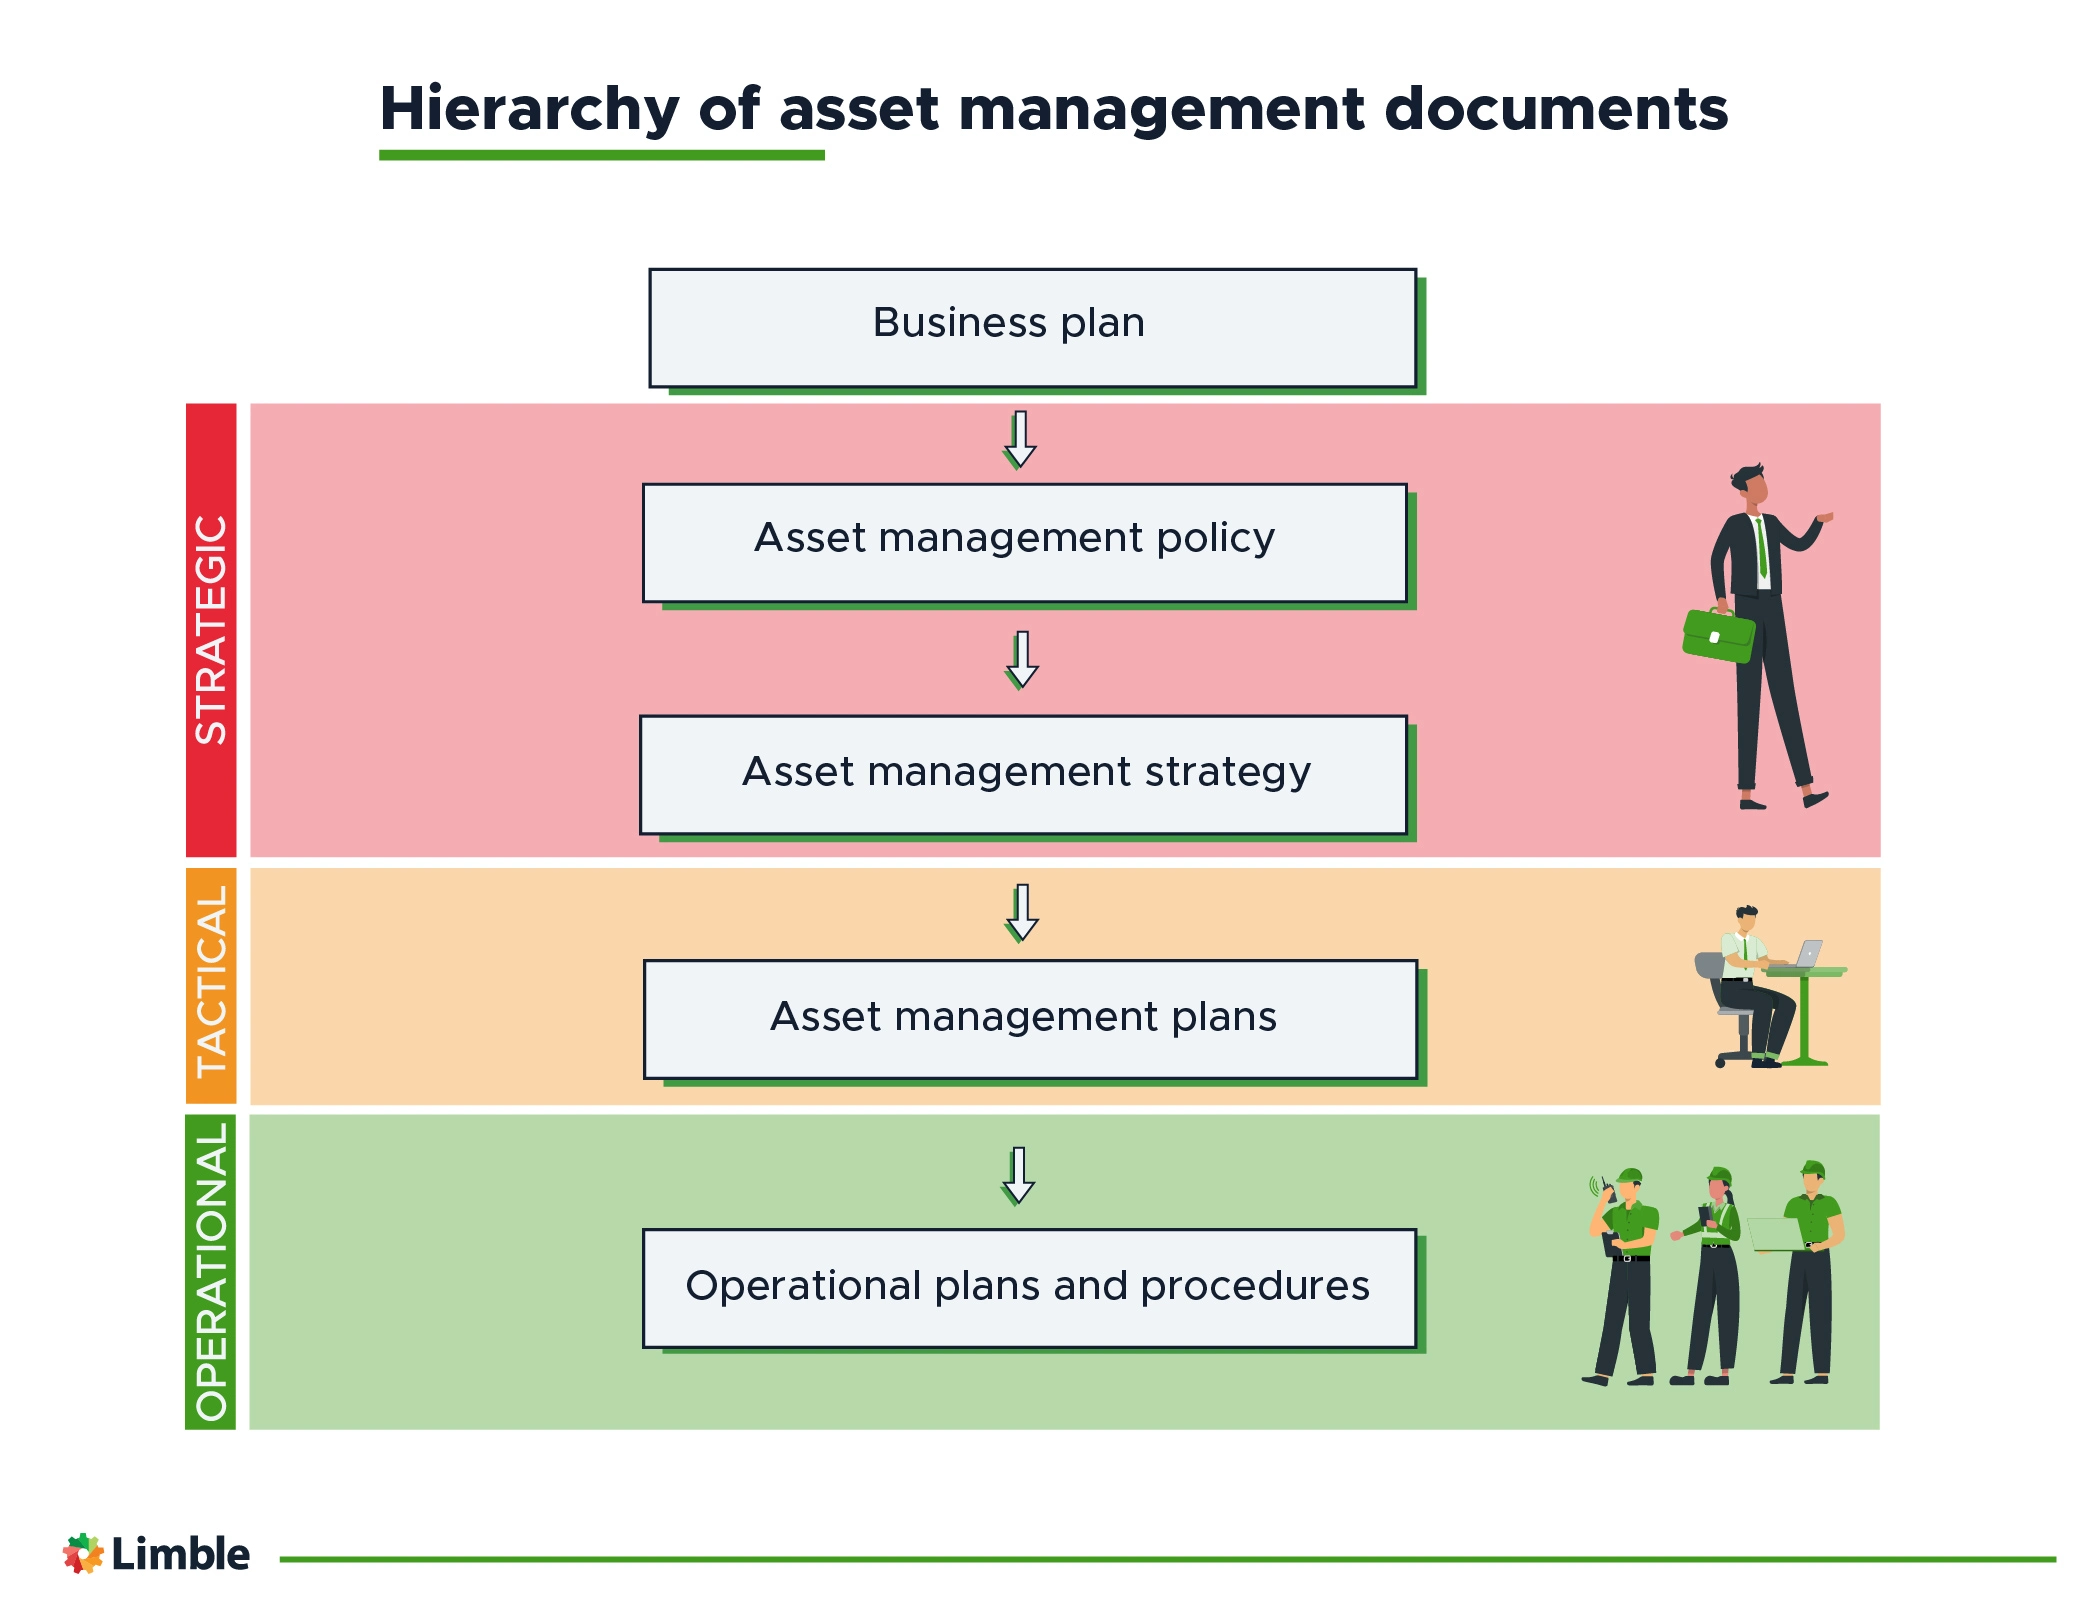 The hierarchy of asset management documents